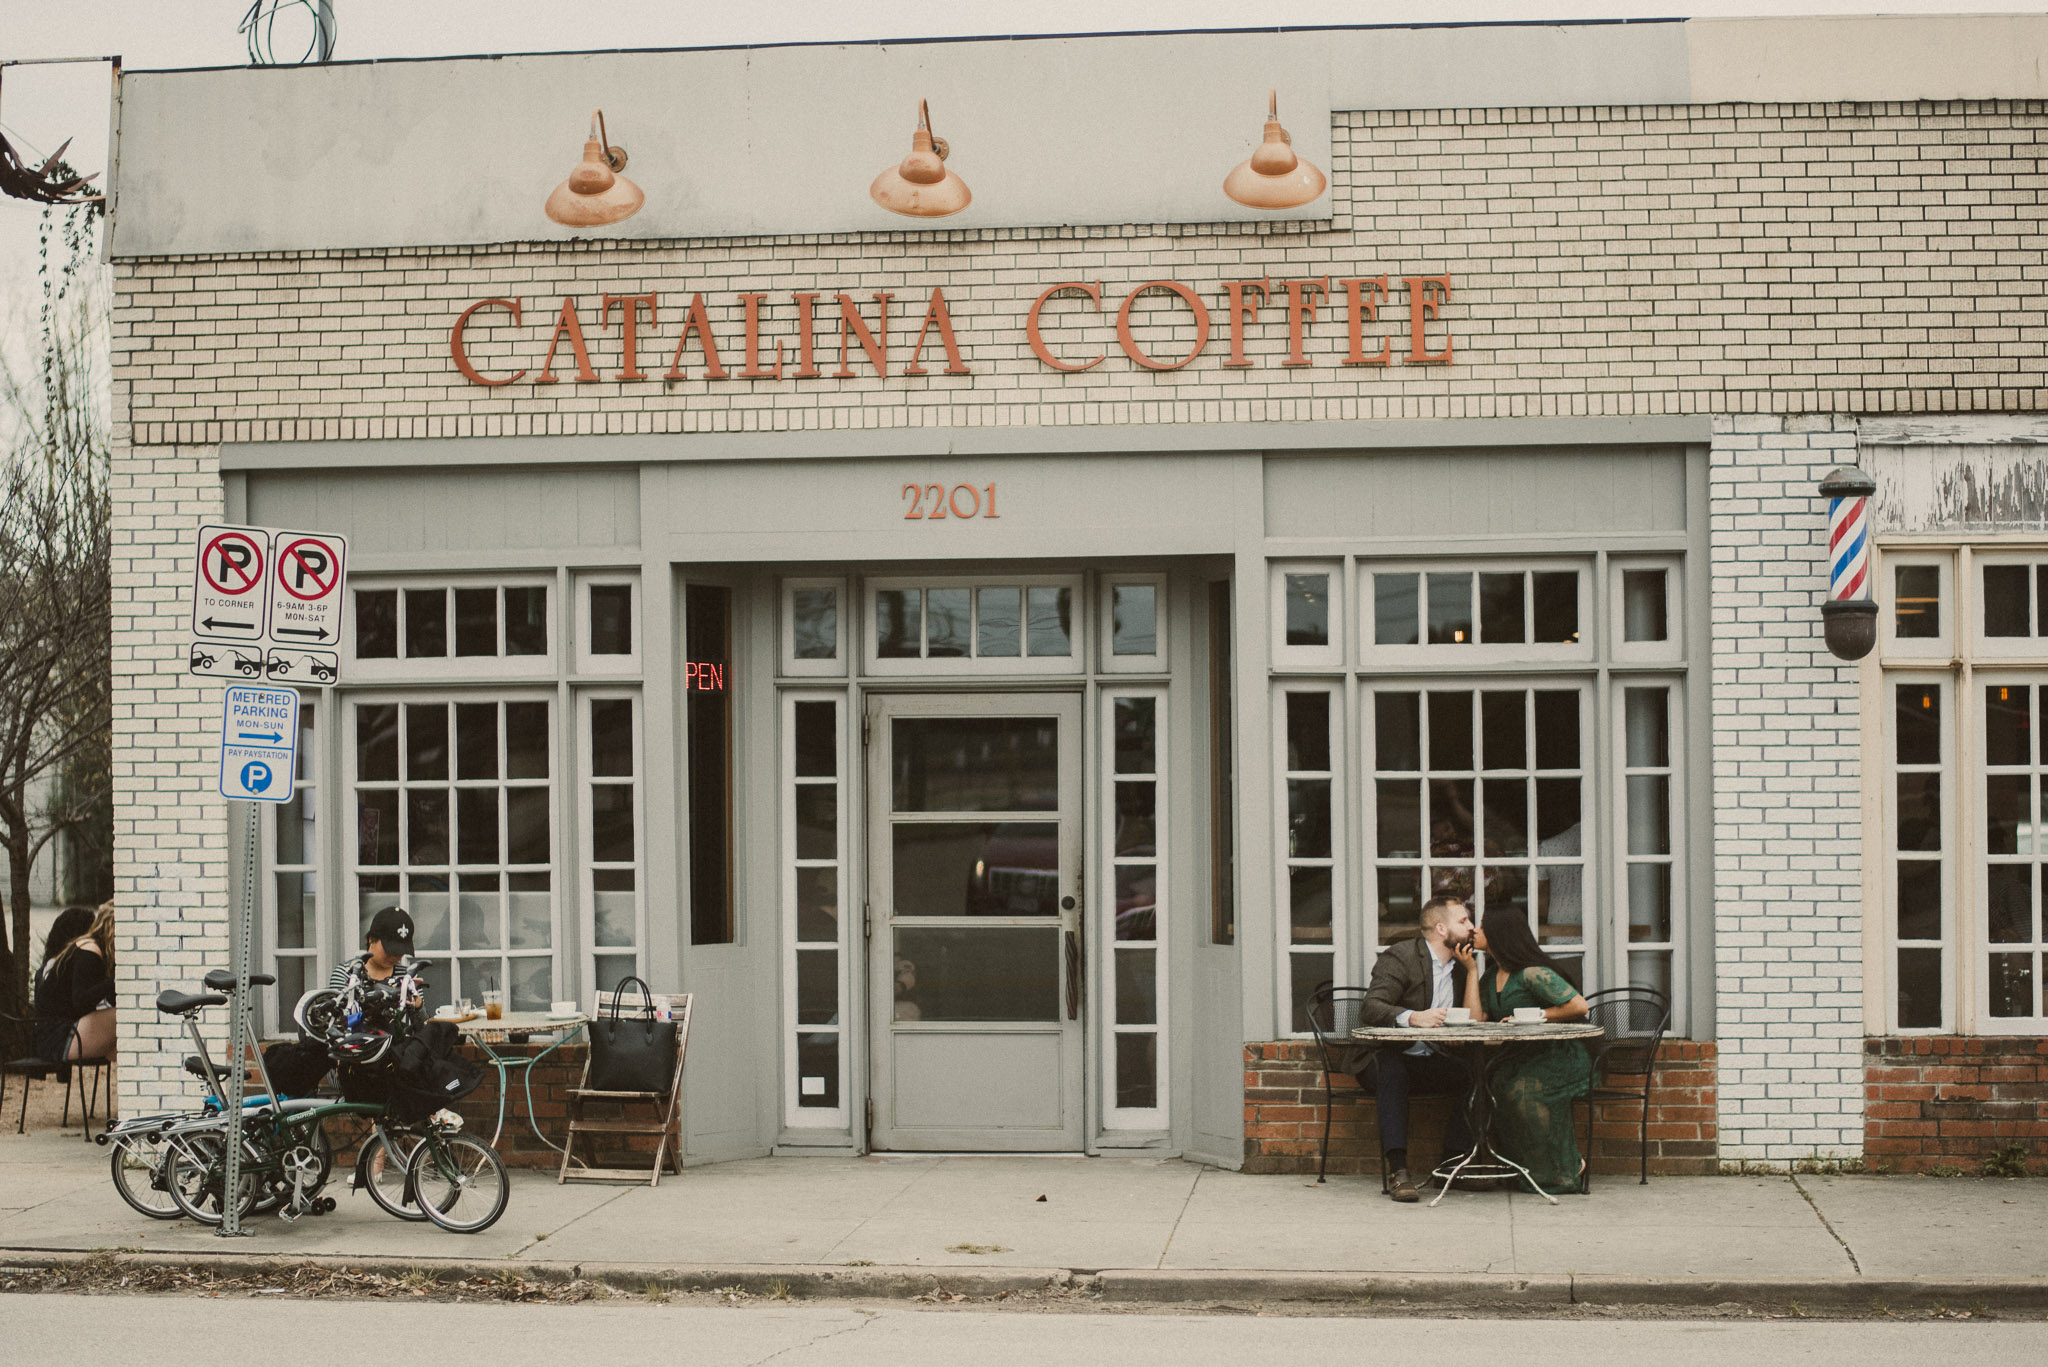 Catalina Coffee Engagement The Heights Houston Tx Intimate Wedding Elopement Engagement Photographer Houston Beyond